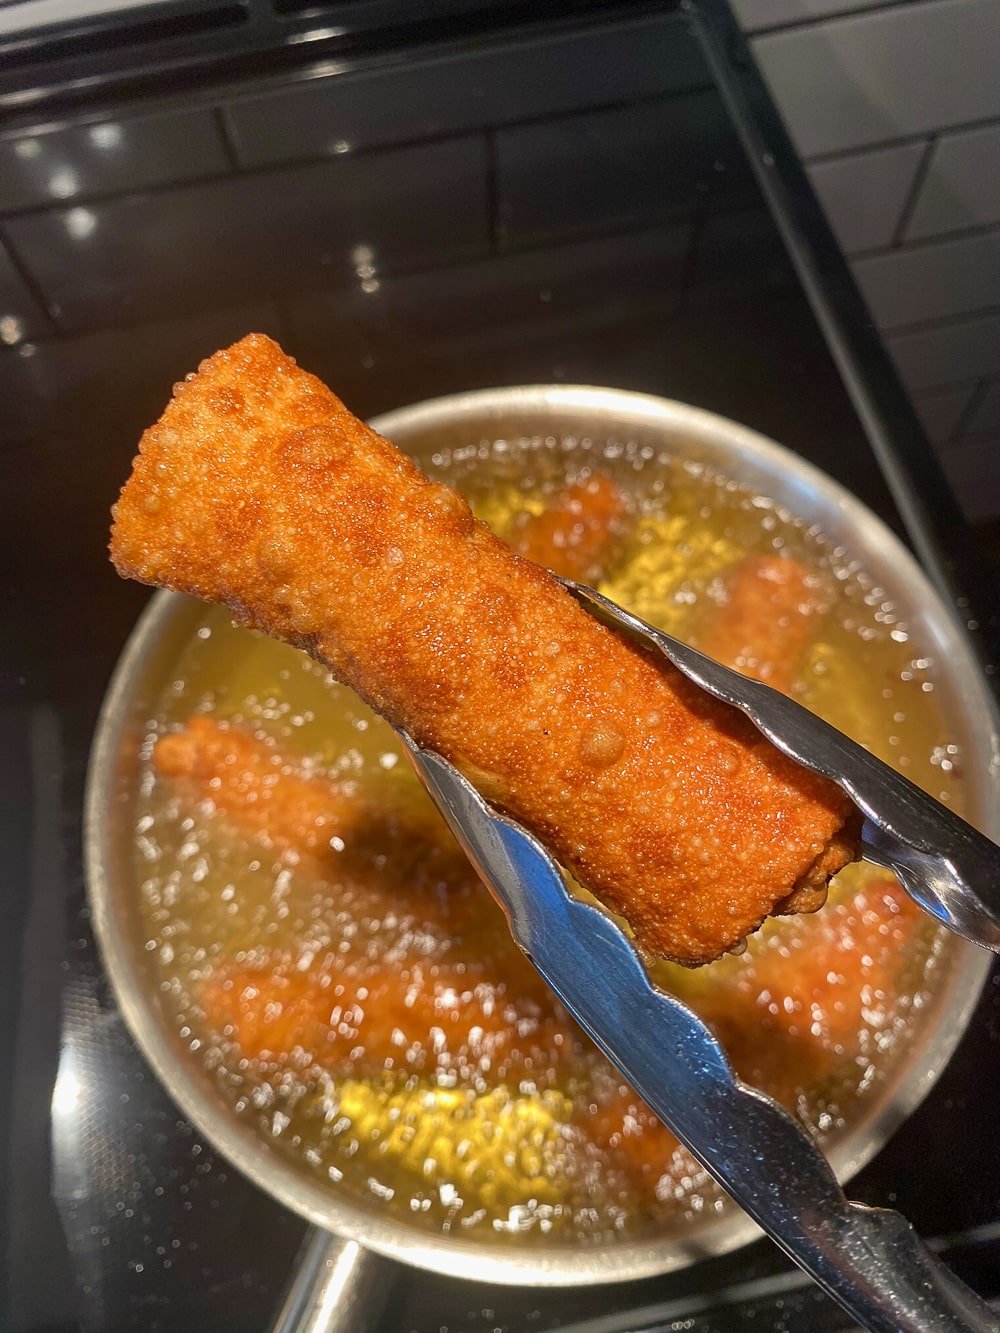 Fried to a golden brown